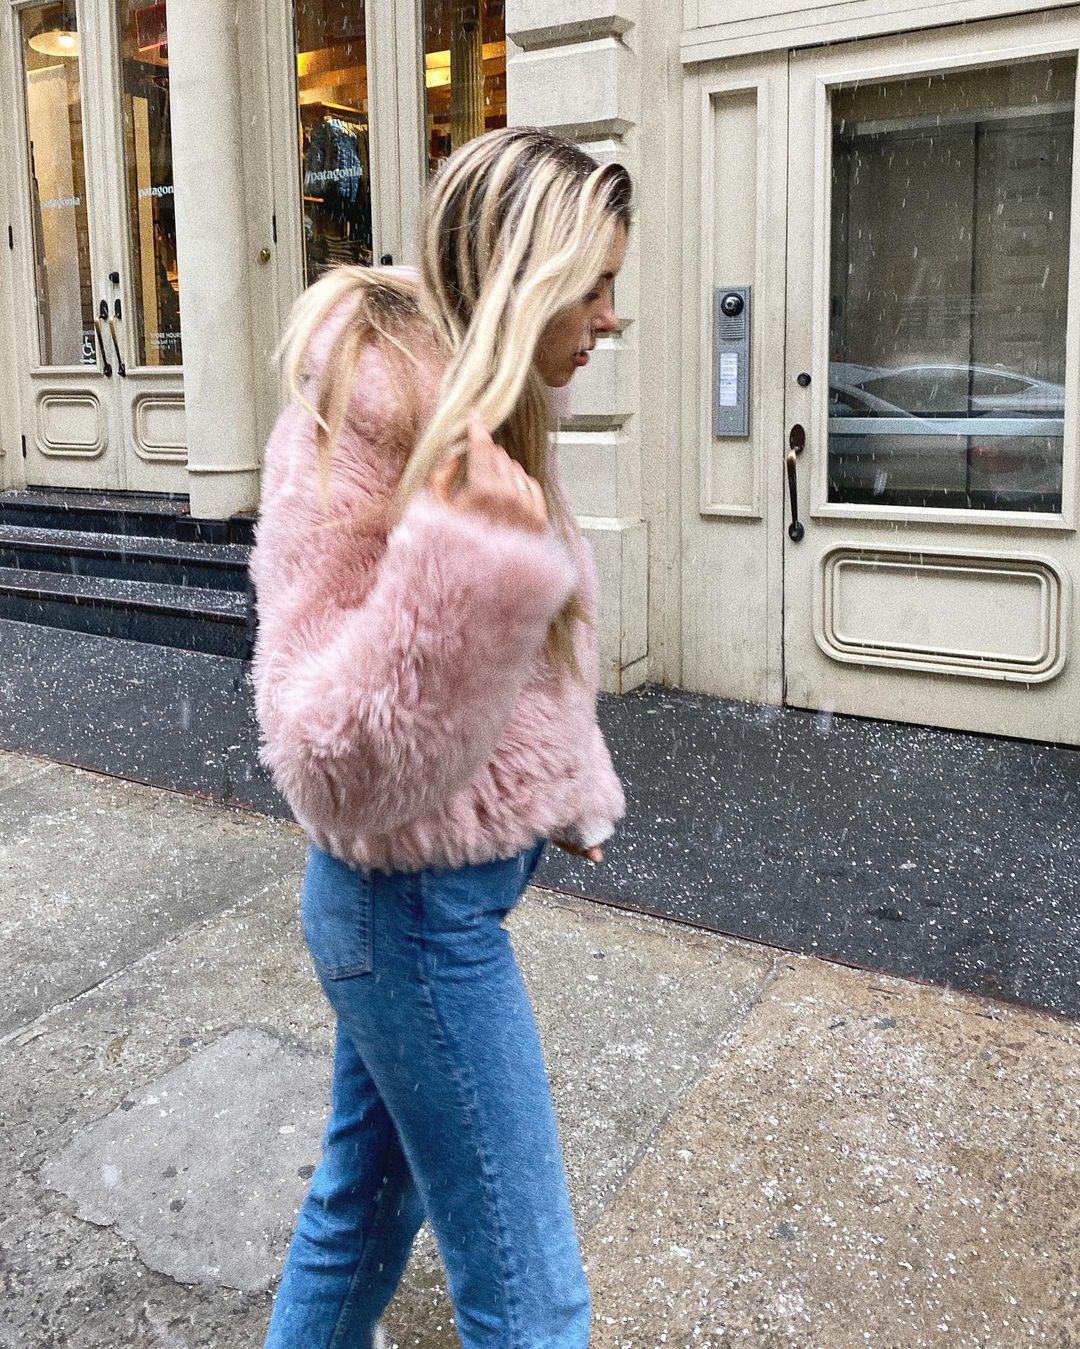 15 Faux Fur Jacket Outfits Will Never, How To Wear A Long Fur Coat With Jeans And Jackets